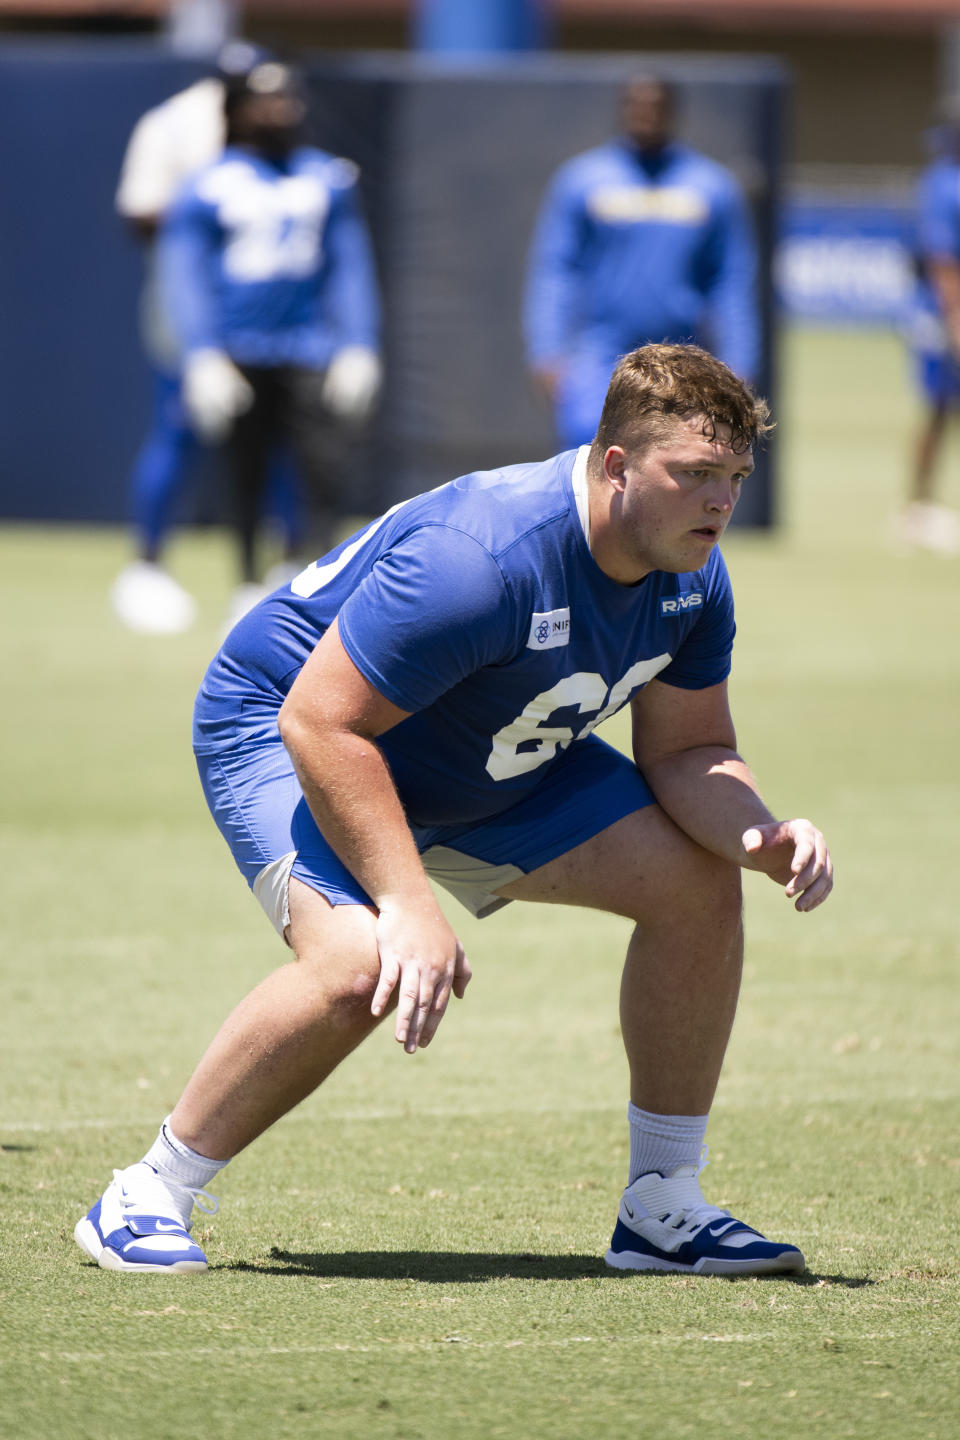 Los Angeles Rams guard Logan Bruss works on a drill during NFL football practice Tuesday, July 26, 2022, in Irvine, Calif. (AP Photo/Kyusung Gong)